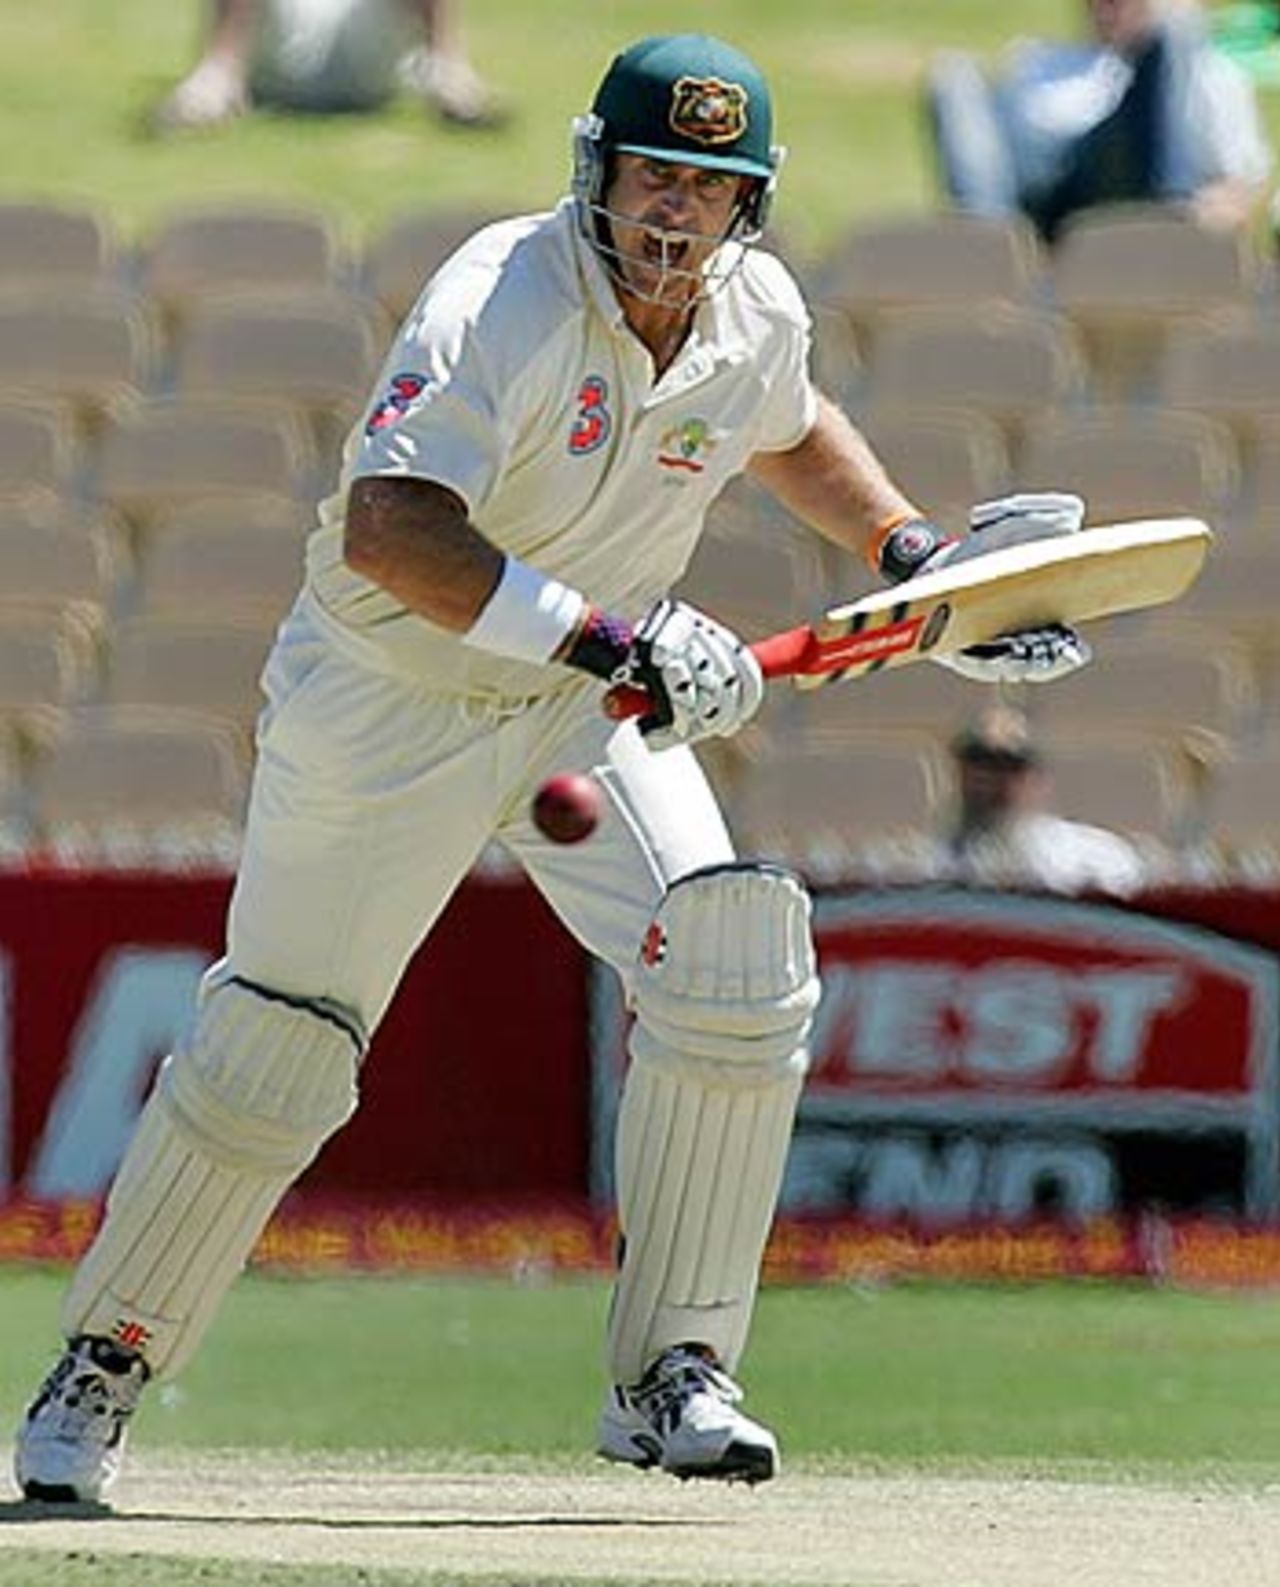 Matthew Hayden calls for a run on his way a half-century, 3rd Test, Adelaide, 5th day, November 29, 2005